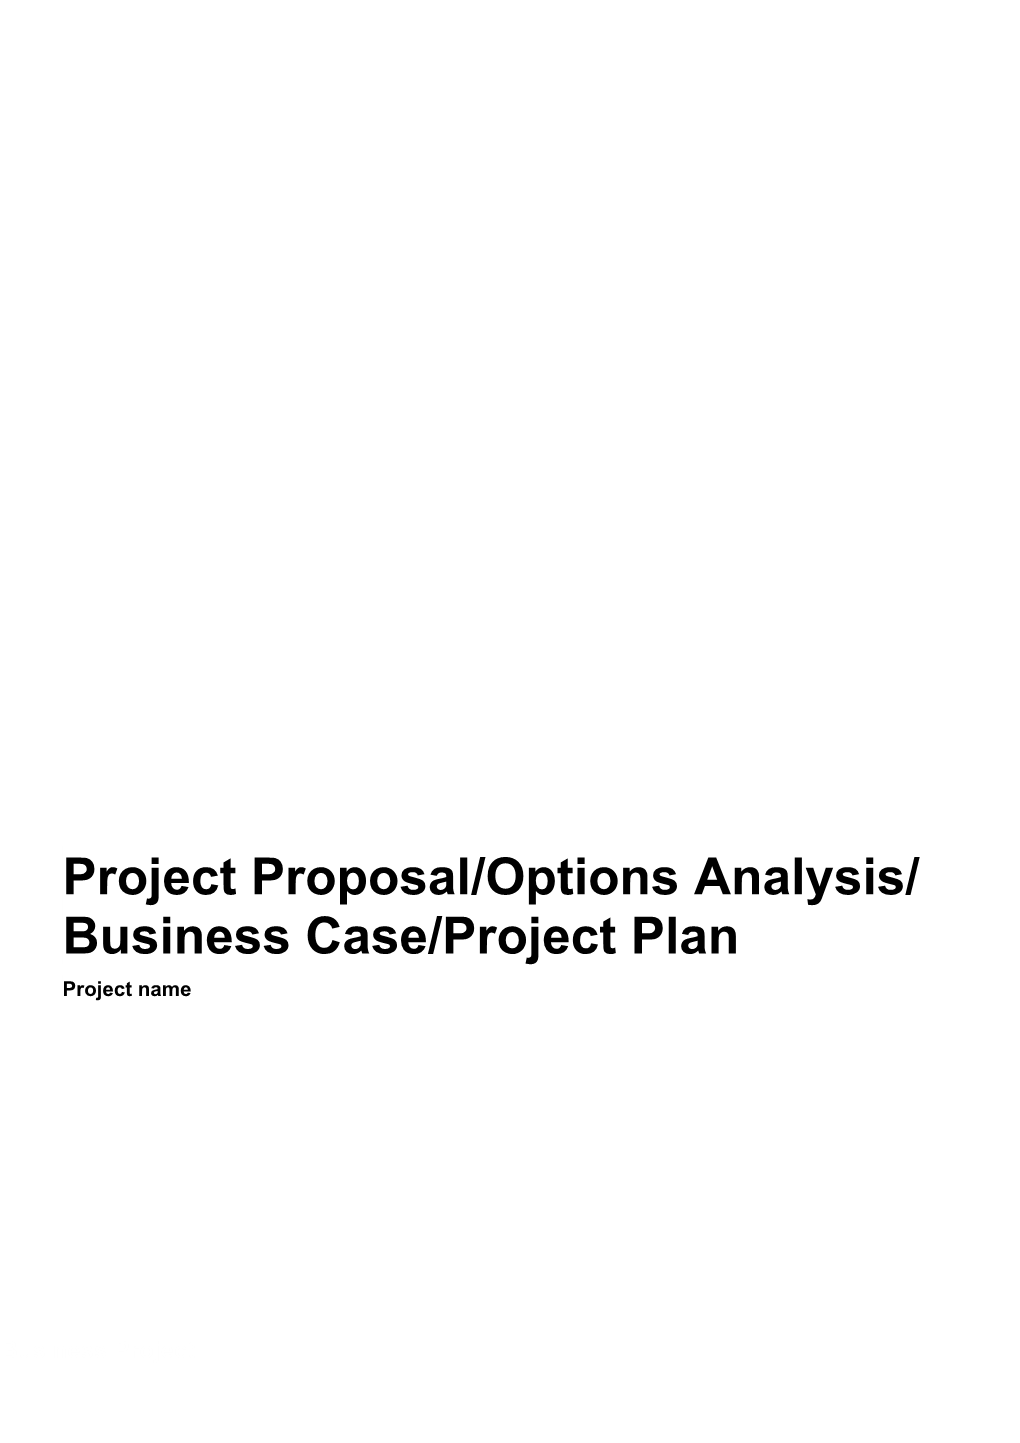 Business Project Proposal/Options Analysis/ Business Case/ Project Plan